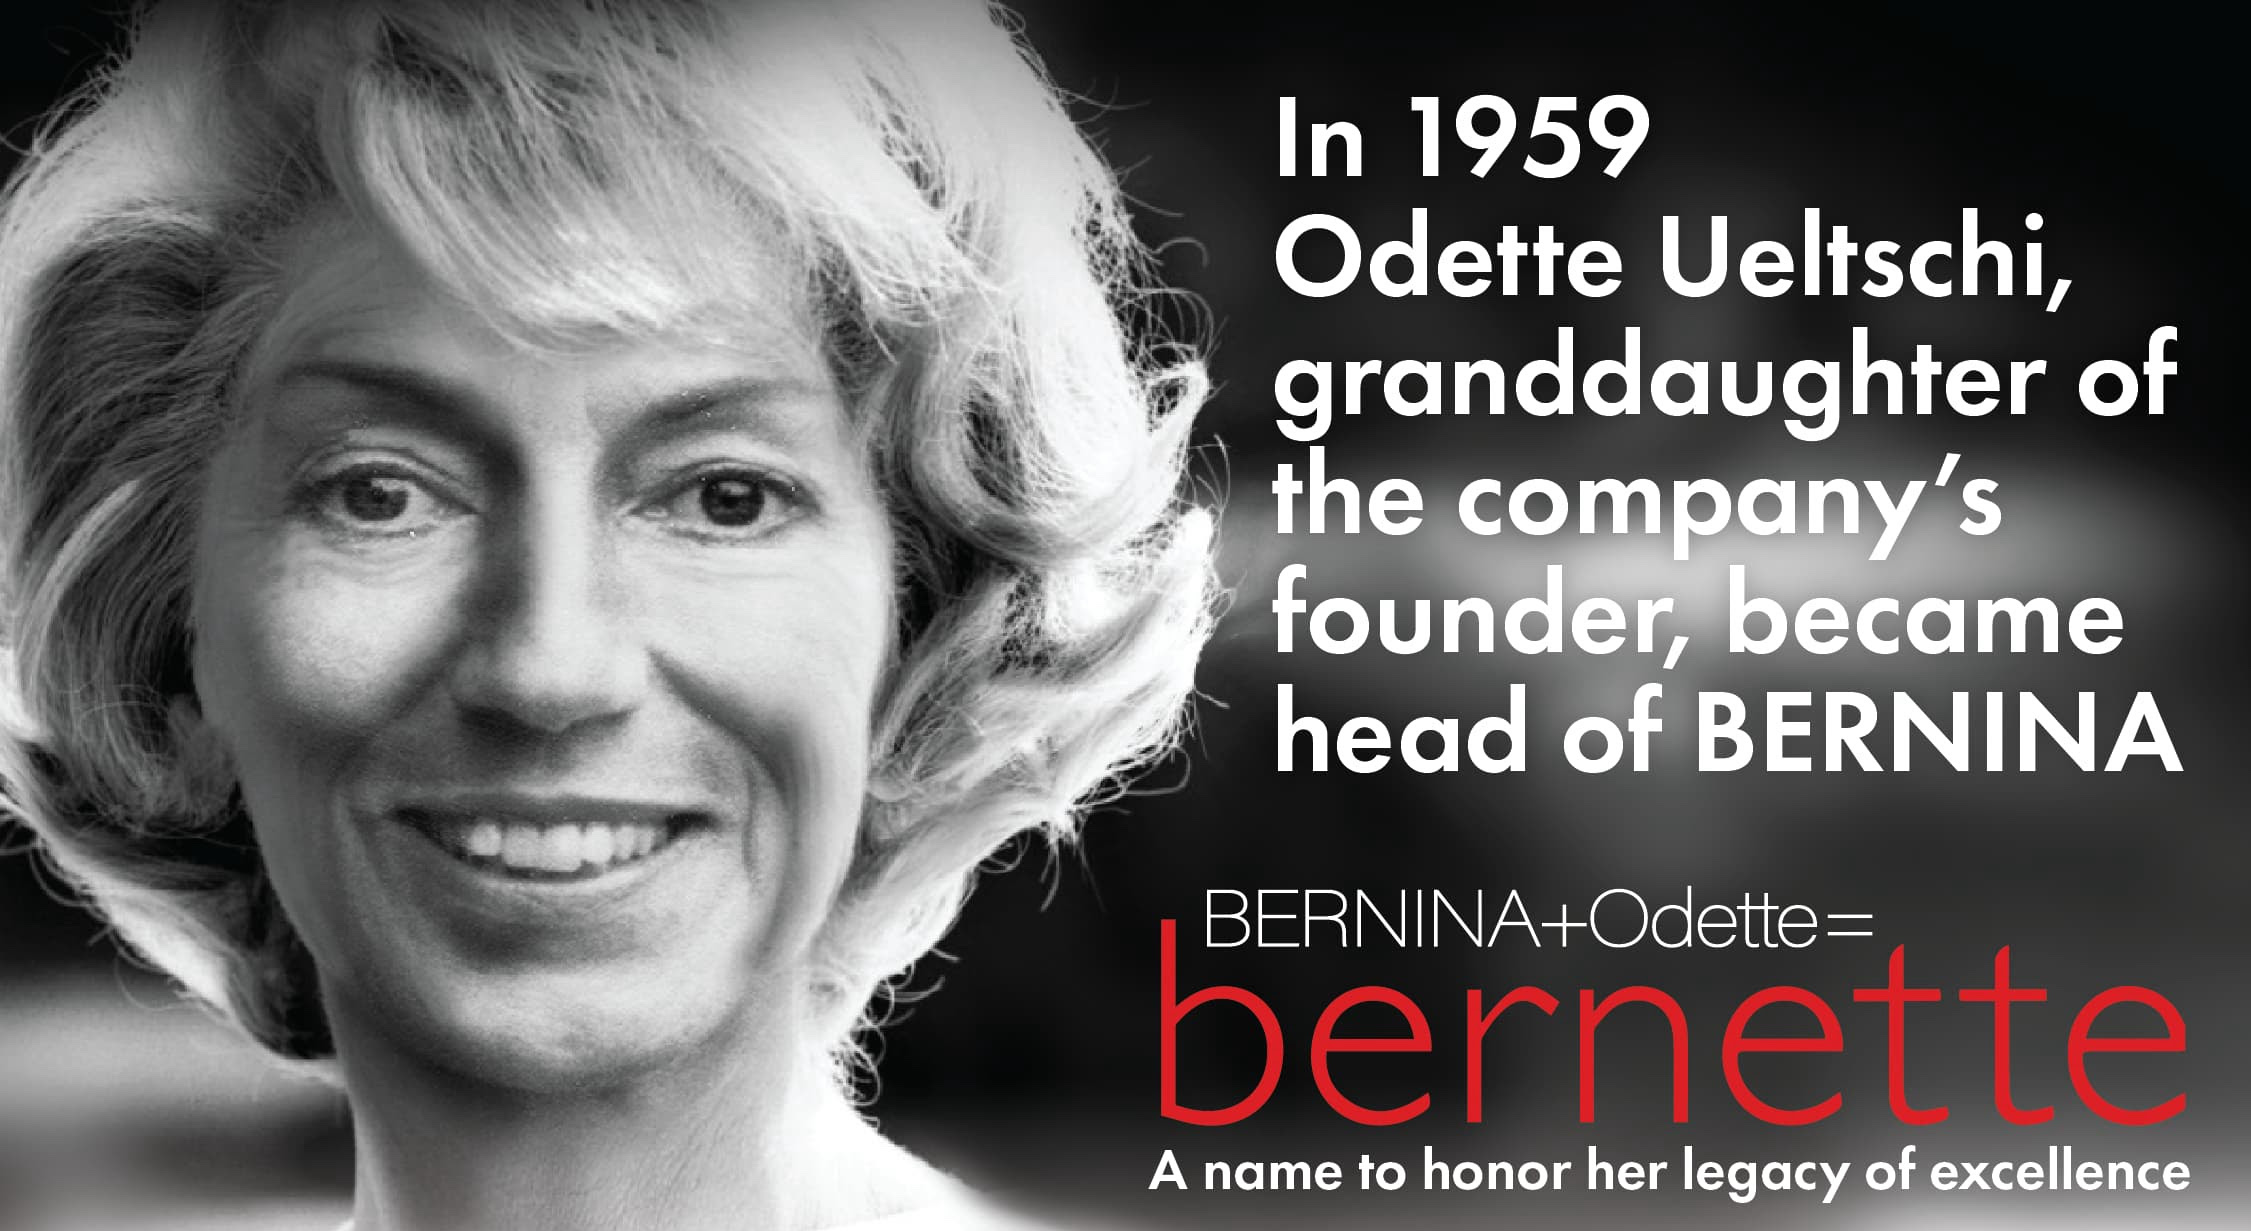 In 1959 Odette Ueltschi, granddaughter of
the company's founder, became head of BERNINA. BERNINA+Odette: bernette. A name to honor her legacy of excellence